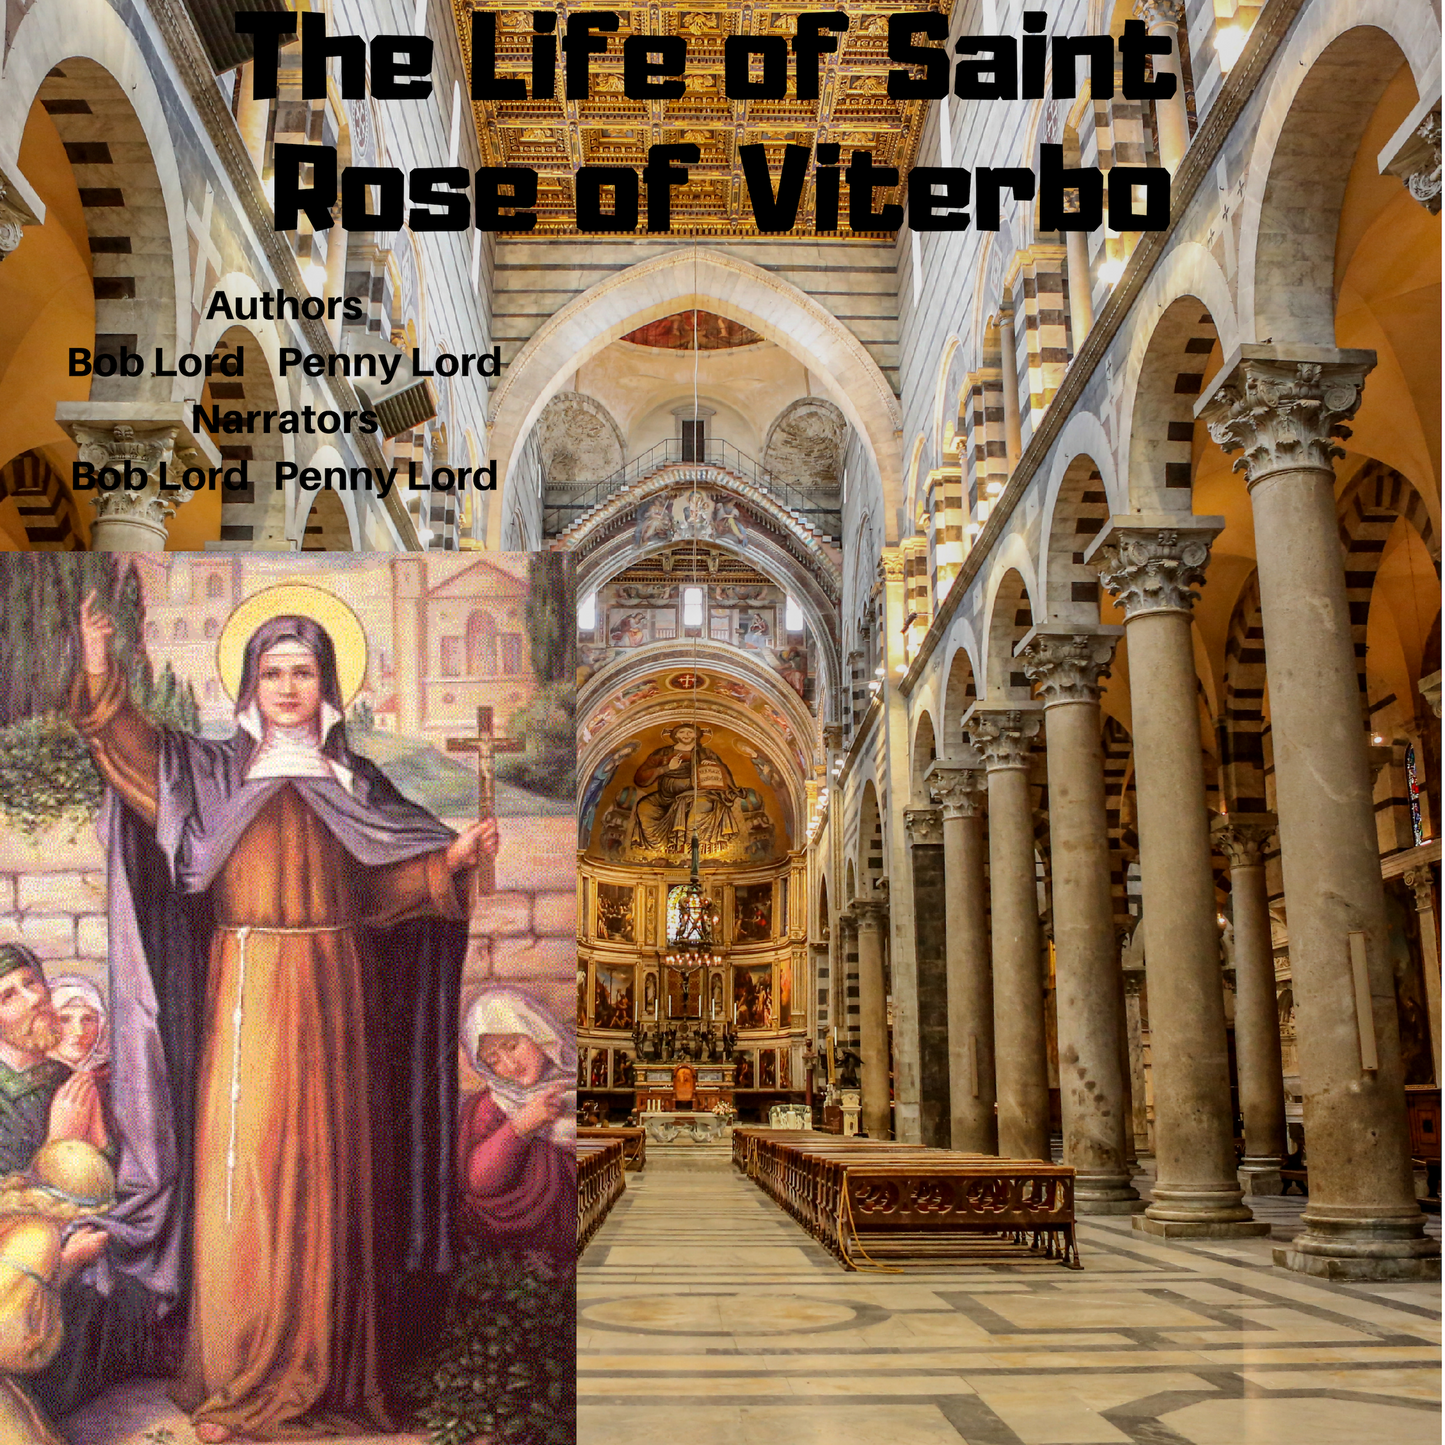 Saint Rose of Viterbo Audiobook - Bob and Penny Lord